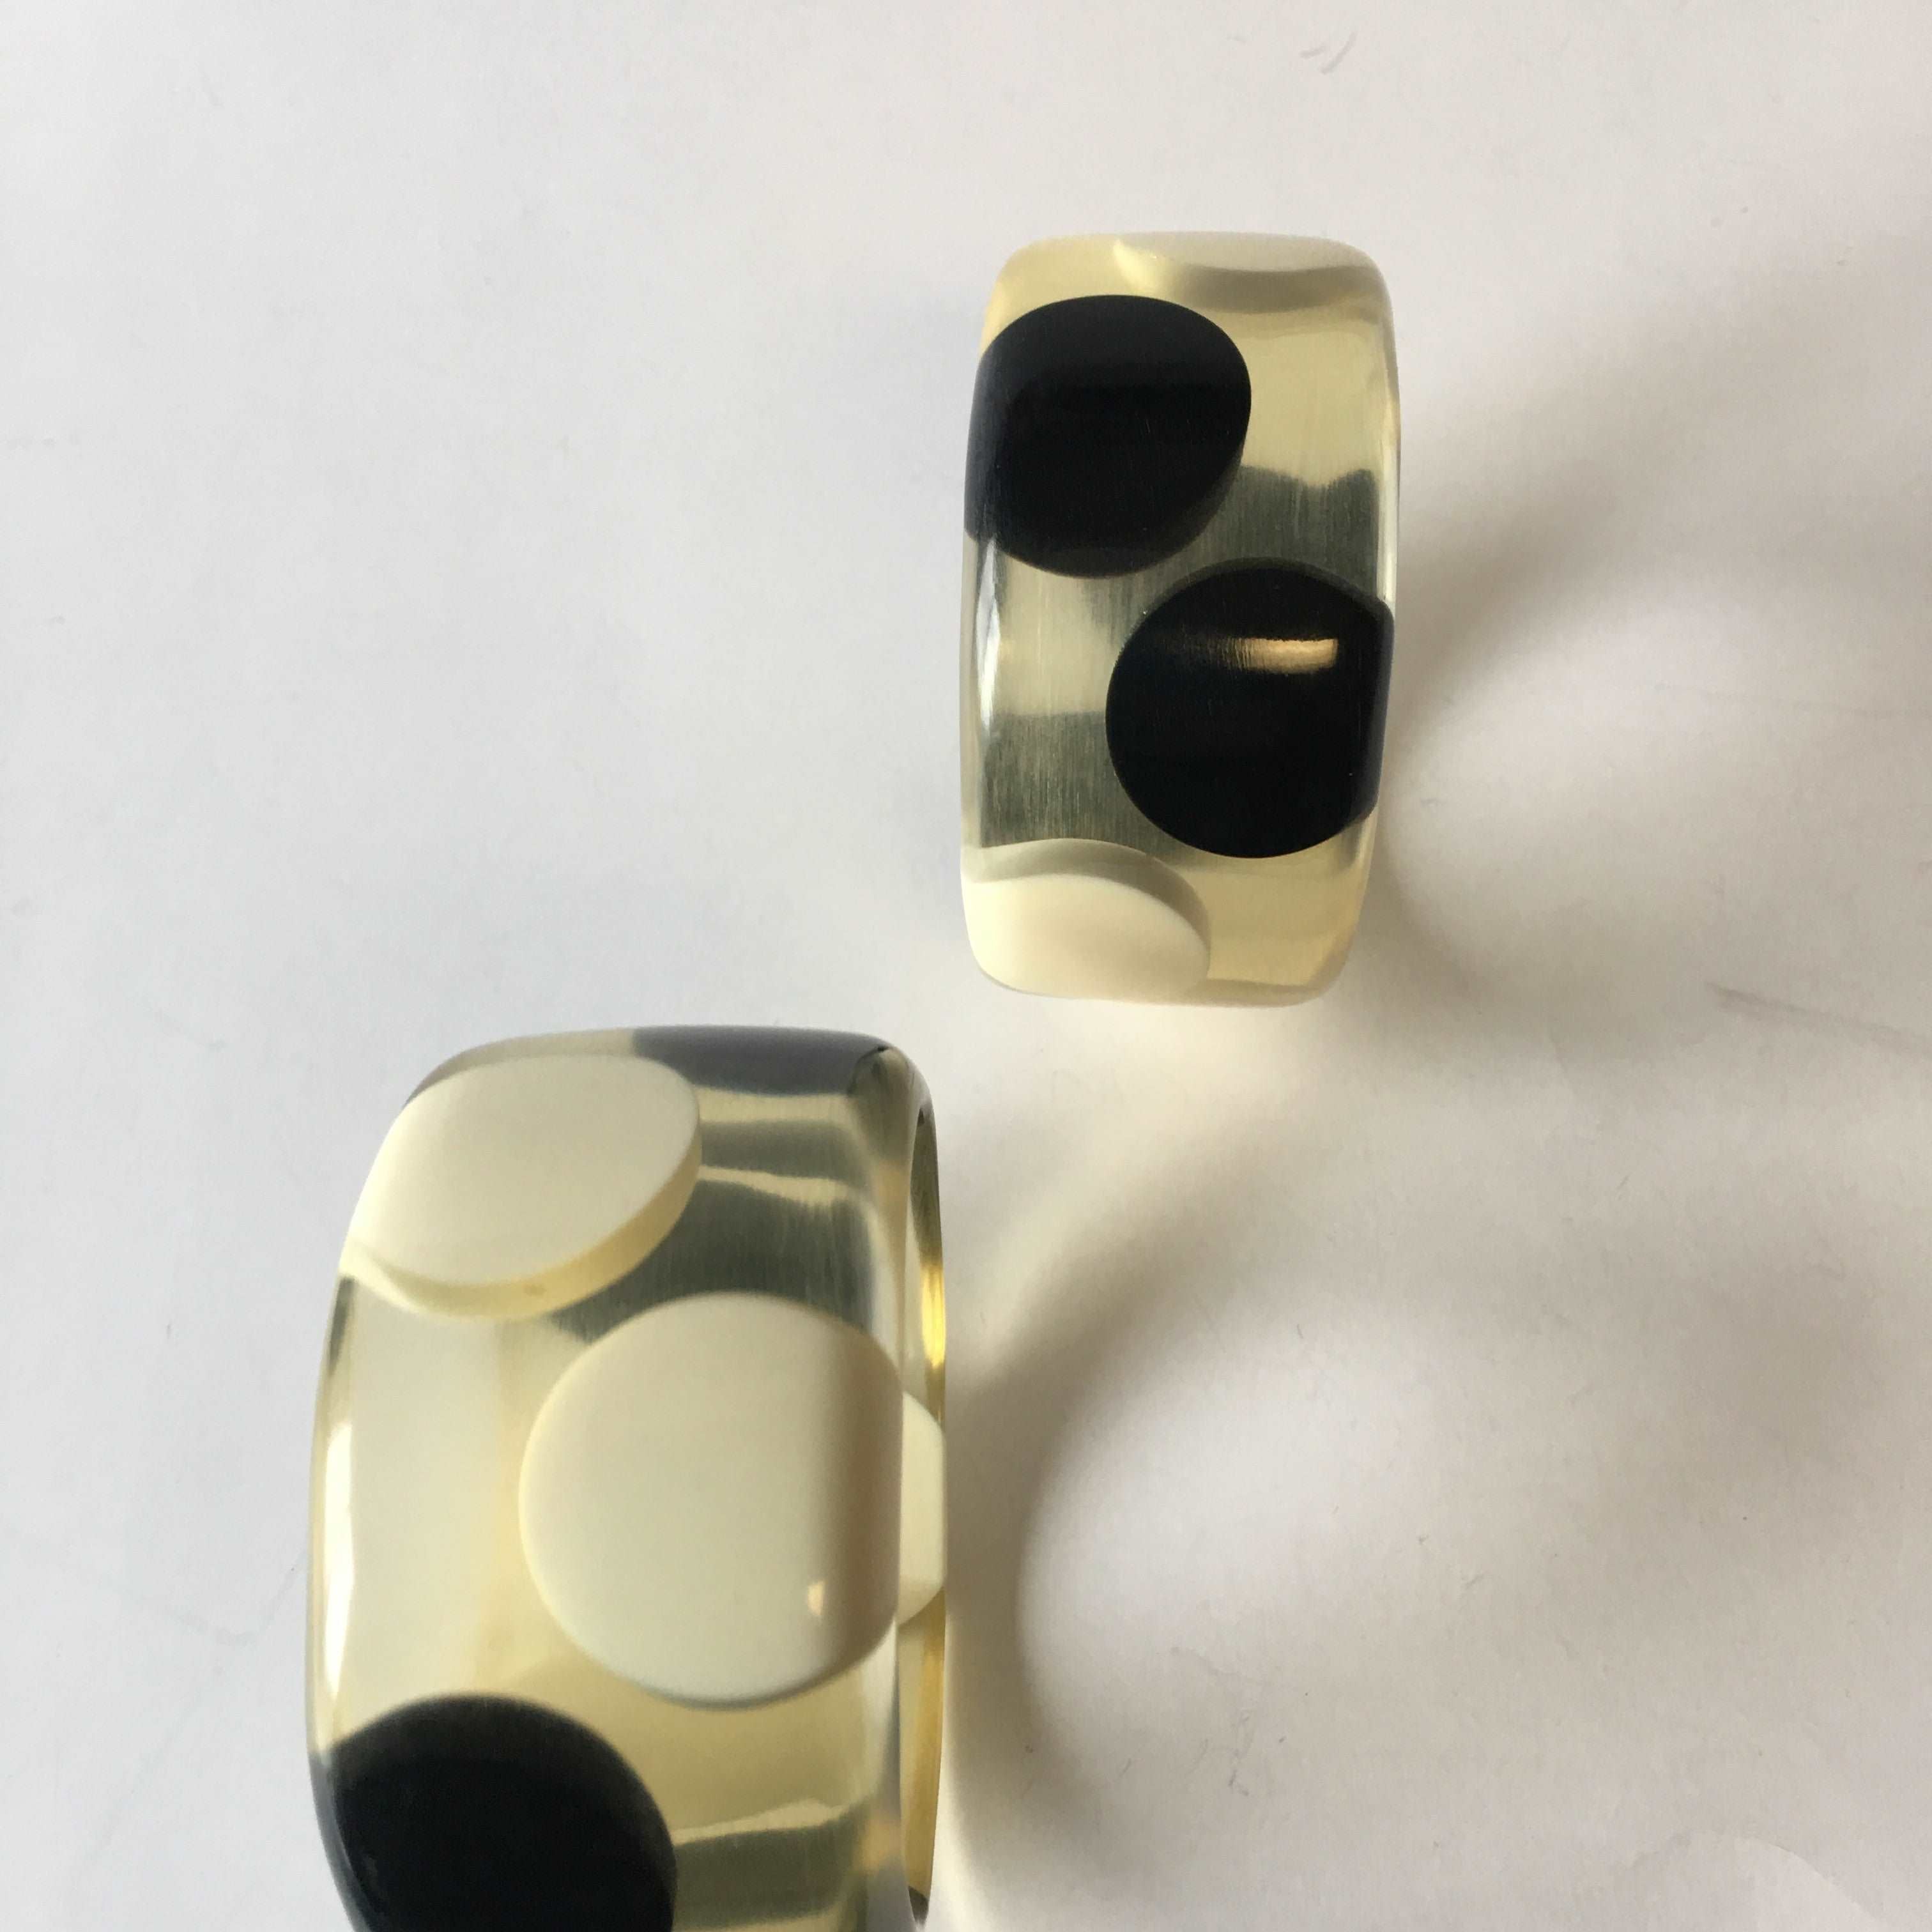 Black White Polka Dots Clear Resin Bangle Bracelet Contemporary Jewelry